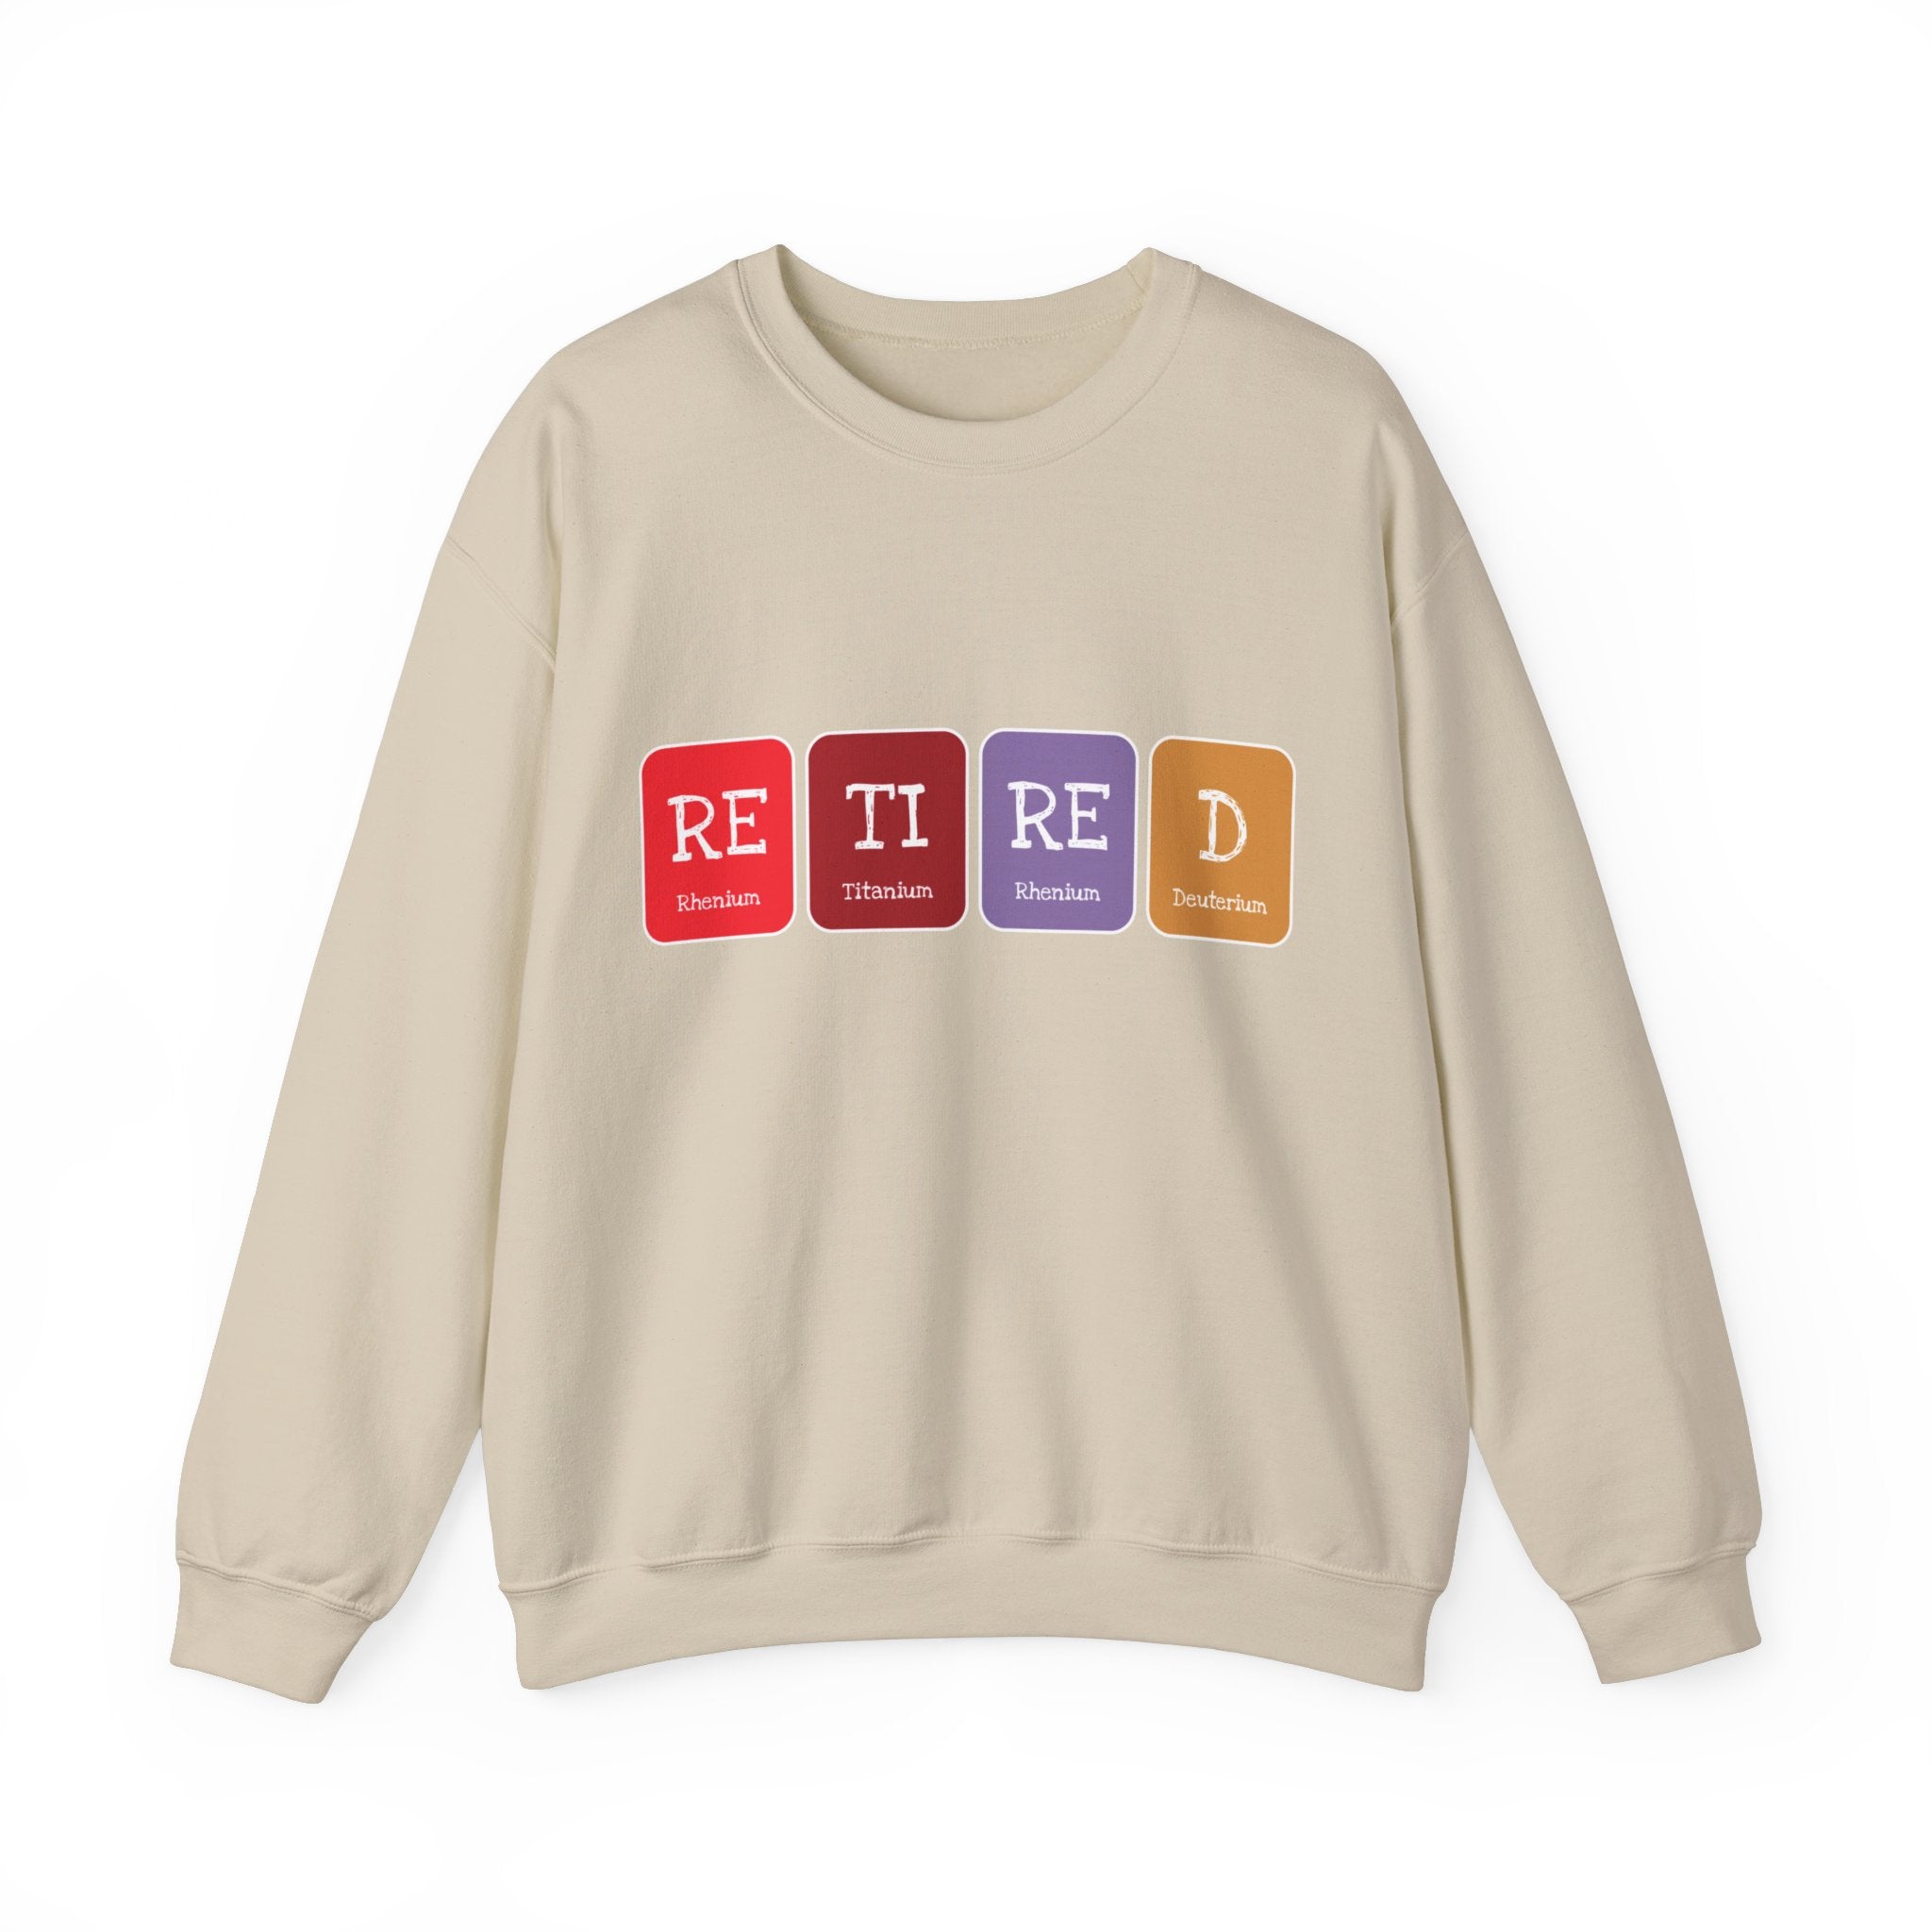 Beige Retired - Sweatshirt with the word "RETIRED" spelled out in colorful blocks, offering both style and comfort.